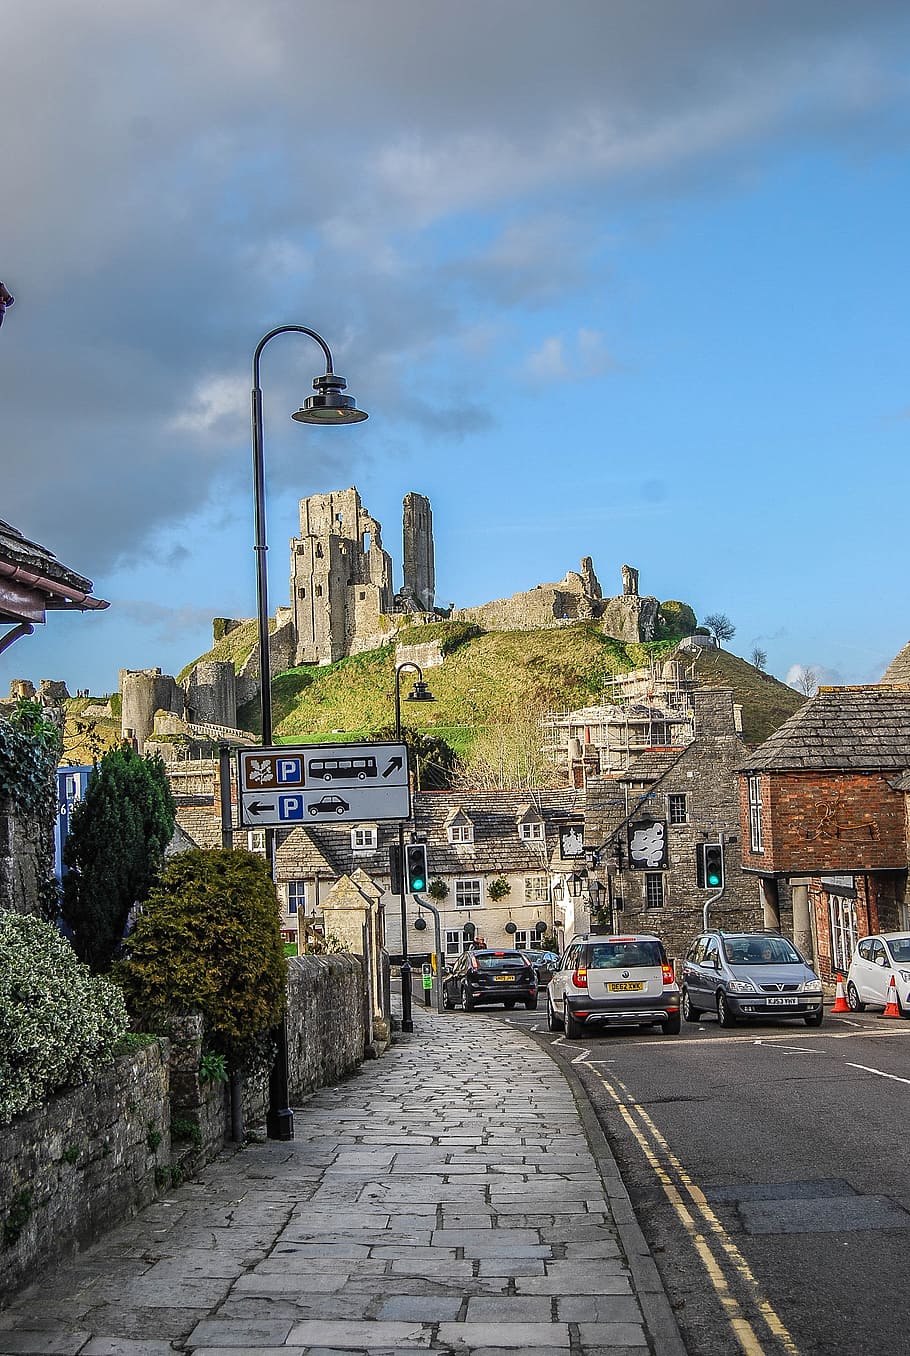 corfe castle, england, sky and clouds, street, buildings, cars, HD wallpaper